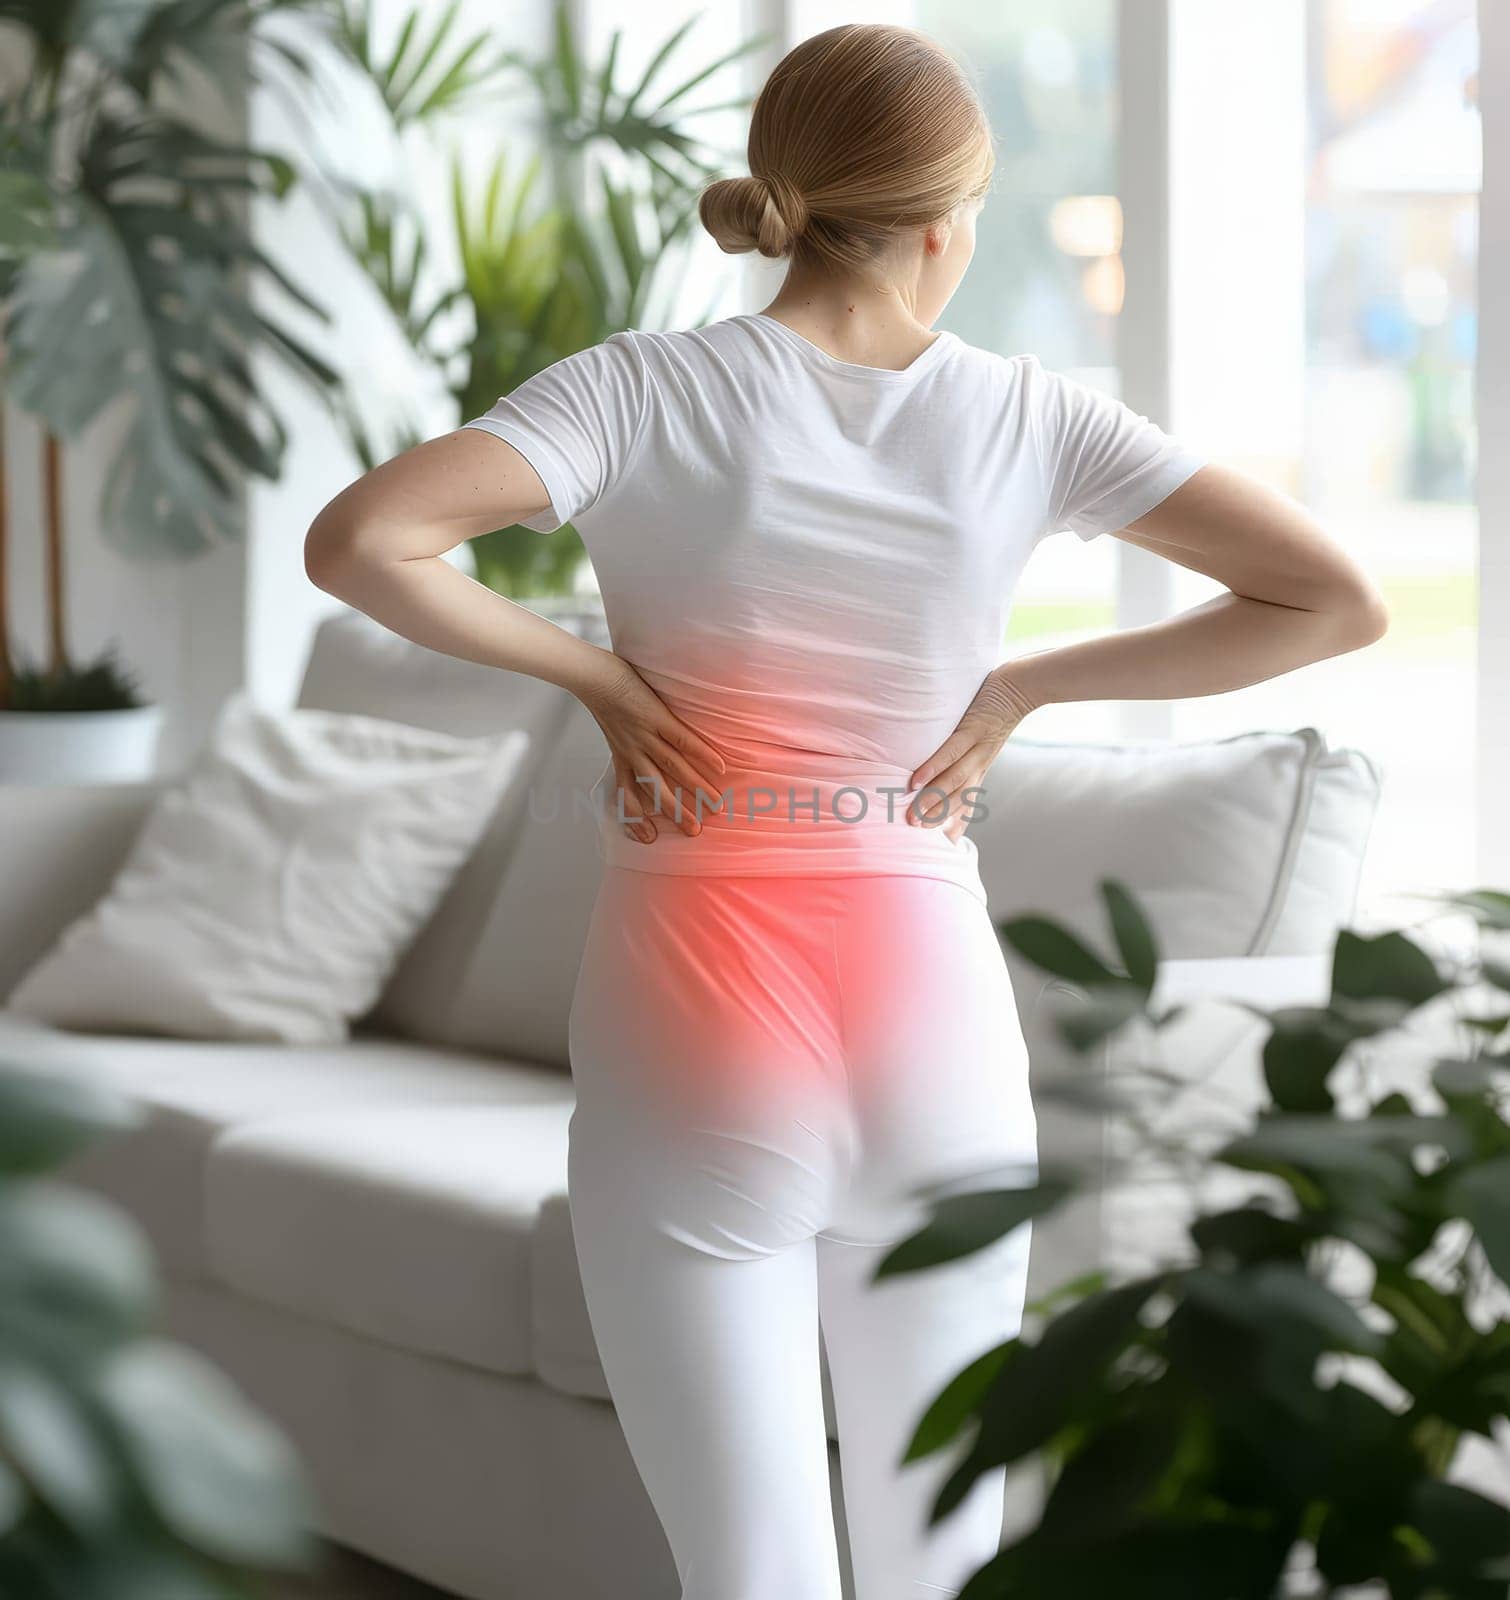 A woman in white attire stands in a bright living room, hands pressed to her lower back, indicating pain. The surrounding indoor plants contribute to tranquil home environment despite the discomfort